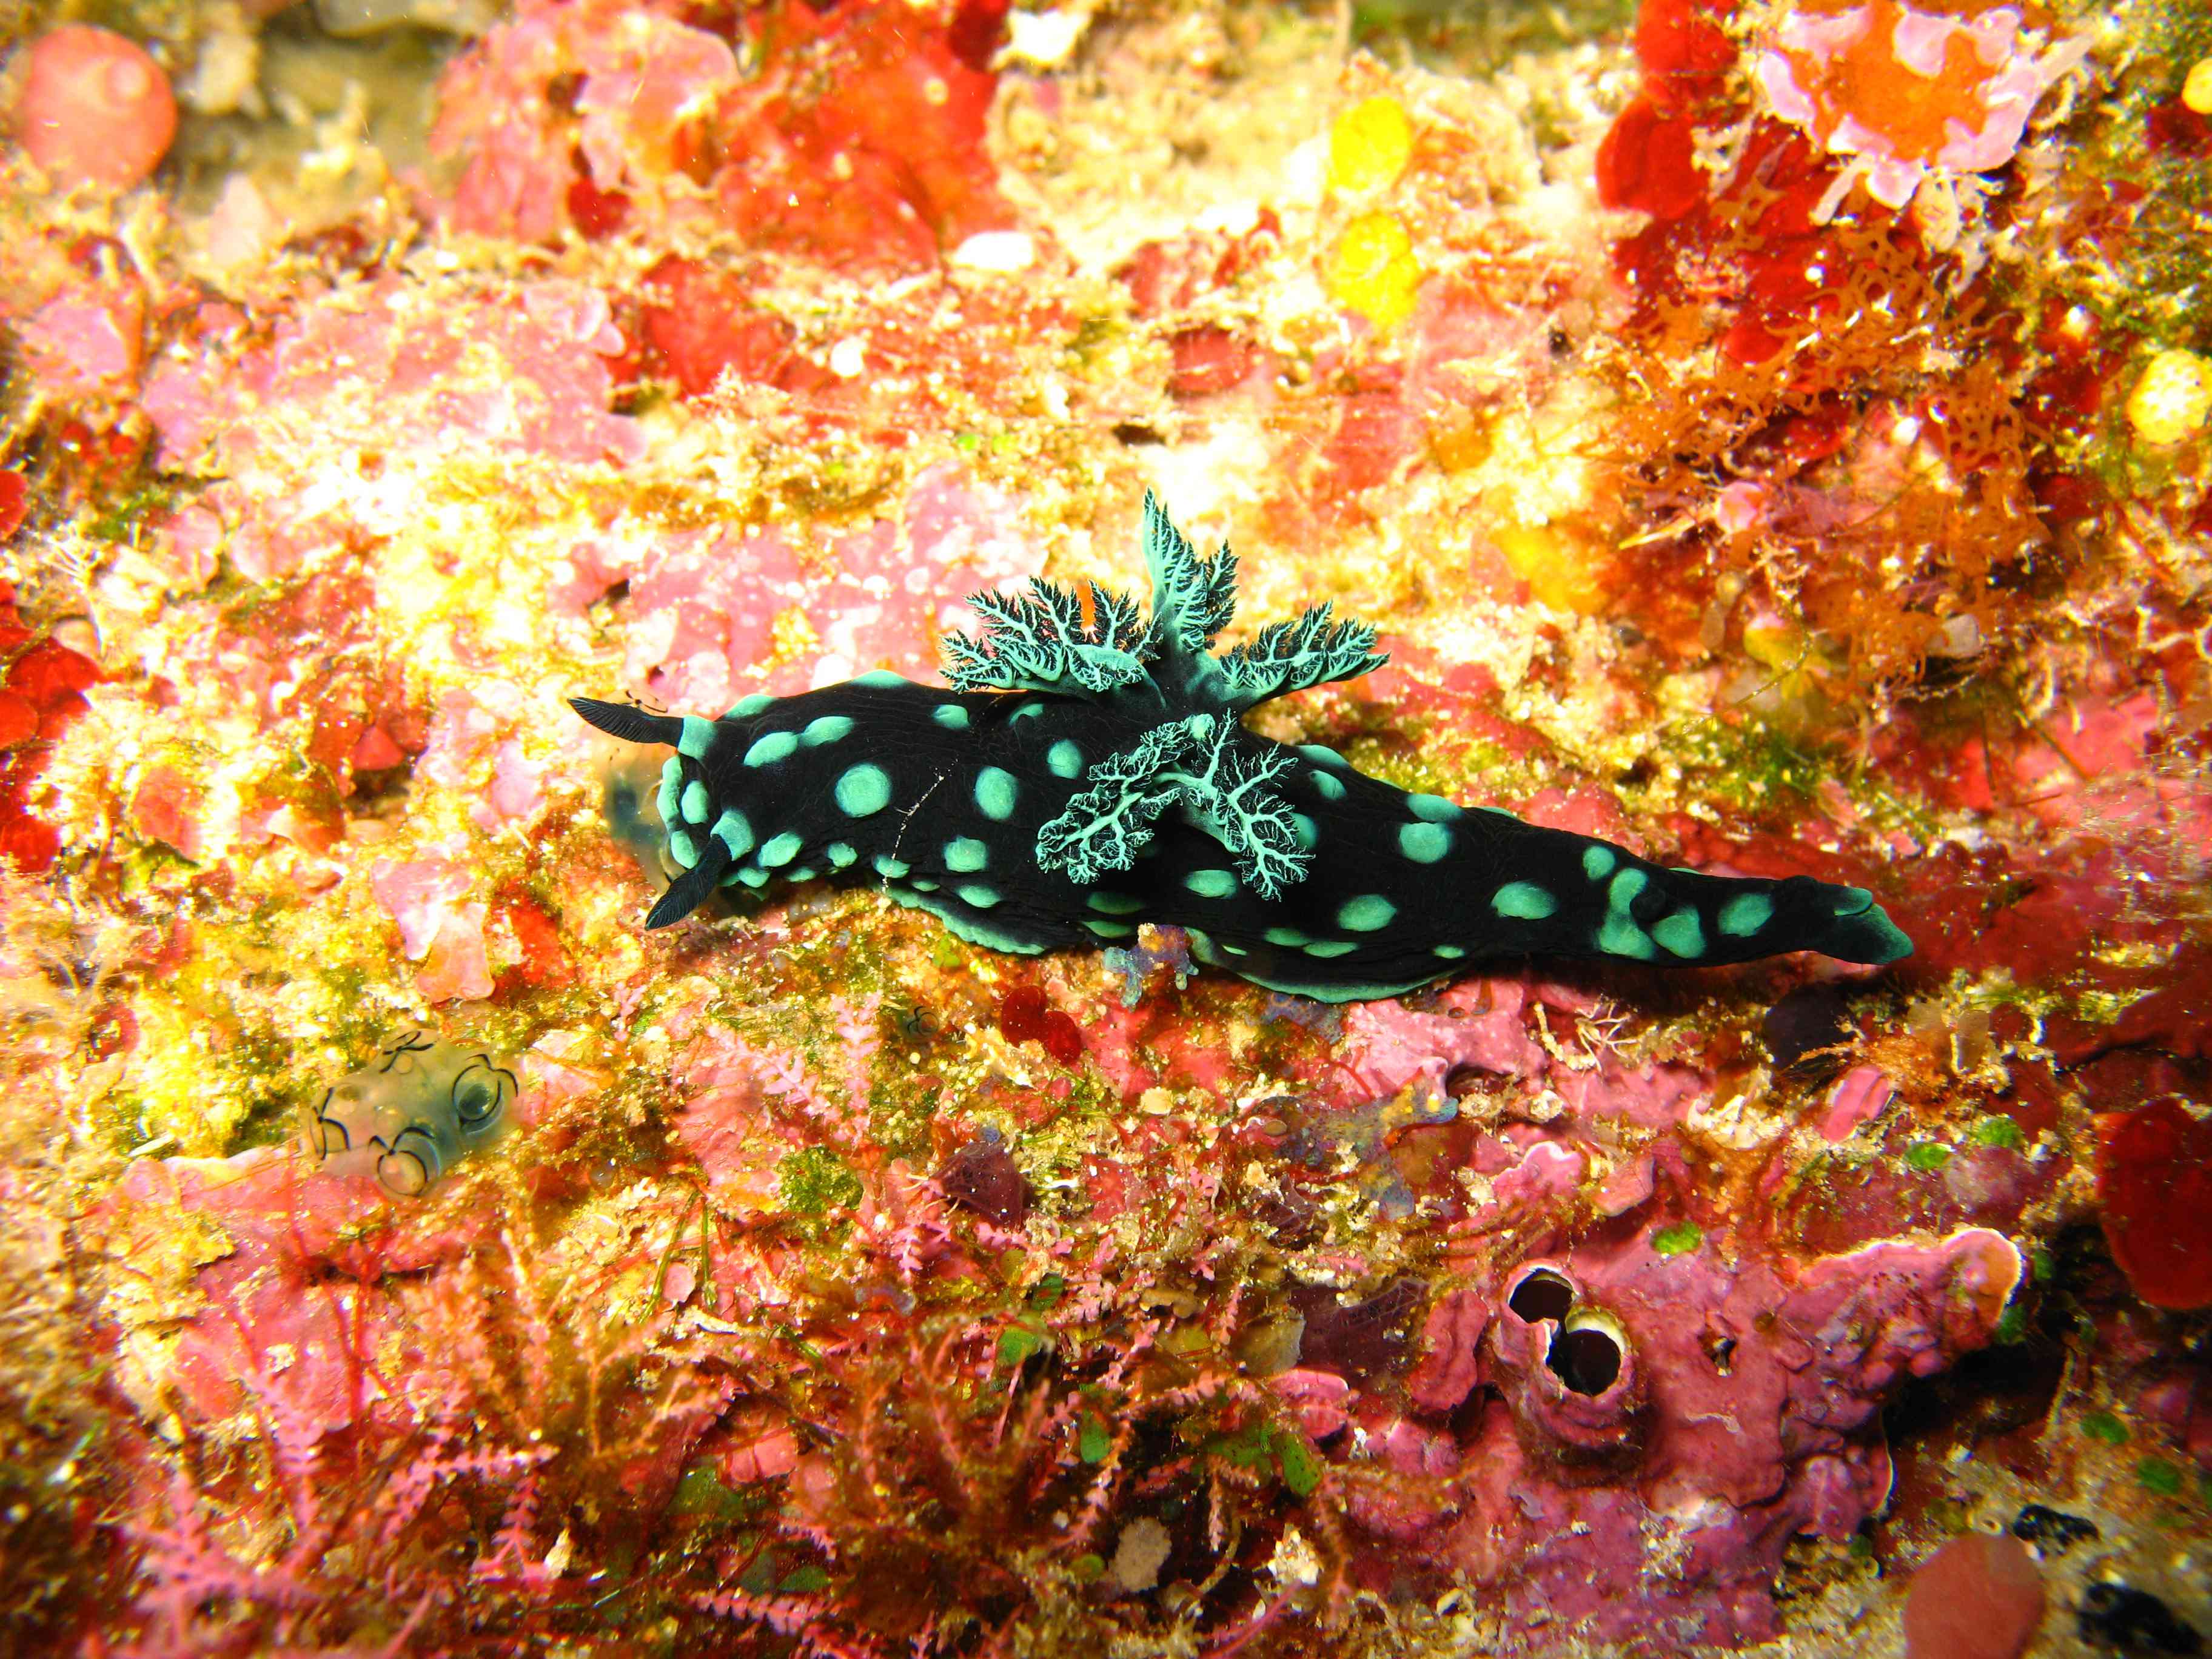 You probably know of nudibranchs by their informal name: sea slugs. These soft-bodied marine mollusks include more than 3,000 species and live in seas all over the world. Nudibranchs can be a variety of bright, beautiful colors and patterns. This is a defense mechanism because of their lack of shell. They resemble the plants around them to camouflage themselves from predators. Additionally, bright colors scare away potential dangers as they generally signal that a creature is poisonous (even if it isn't).